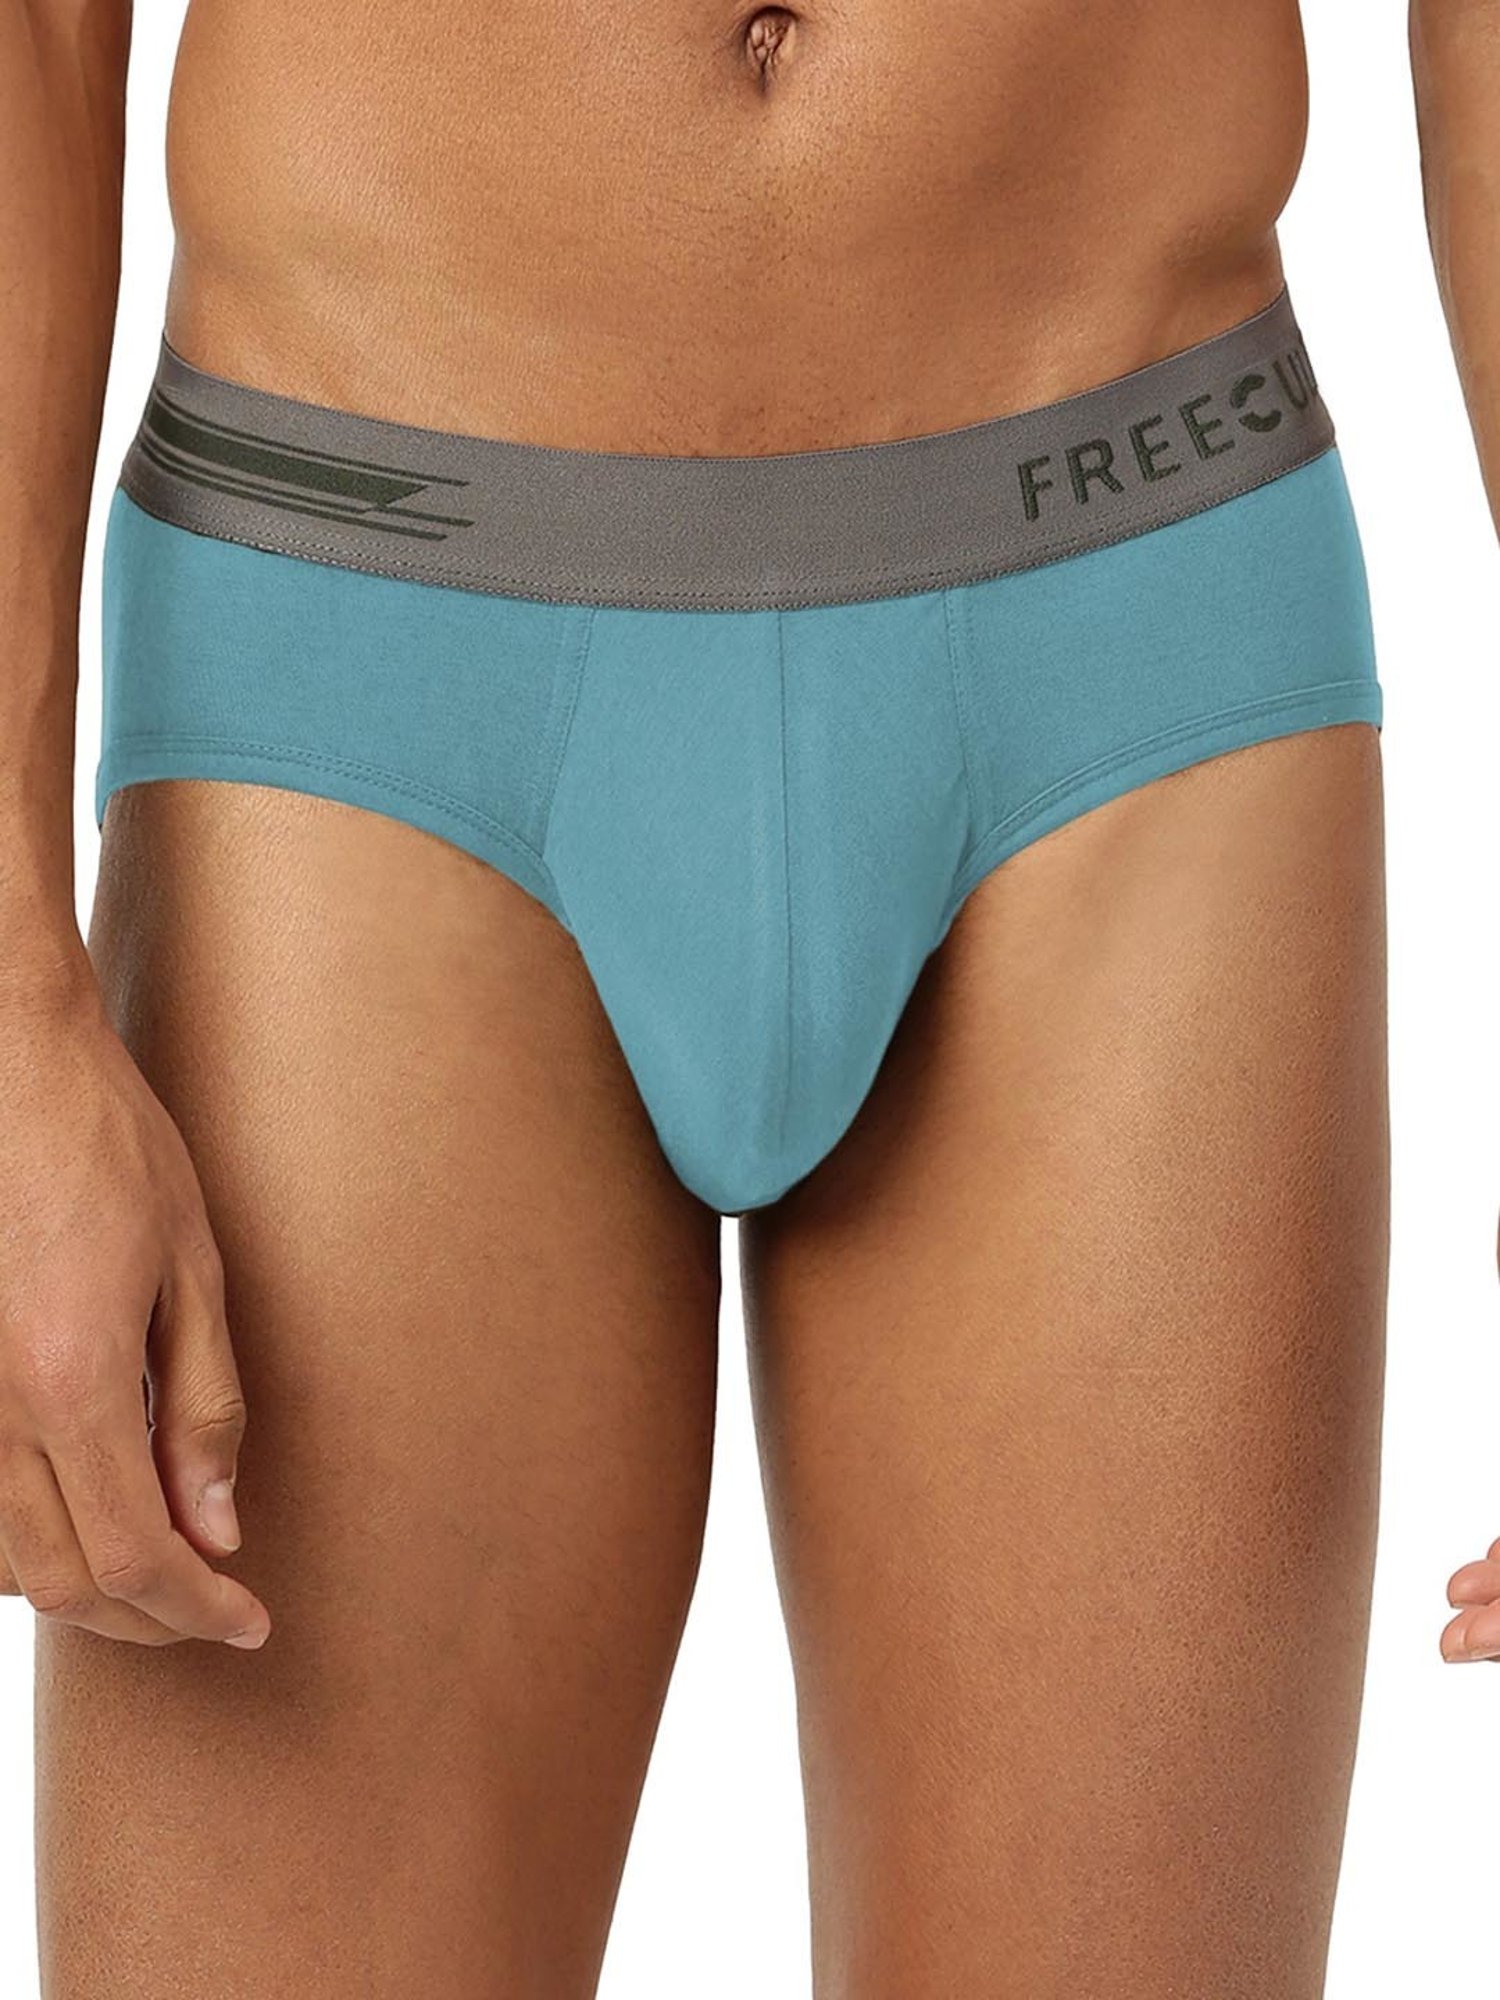 Freecultr Multi Comfort Fit Briefs - Pack of 3